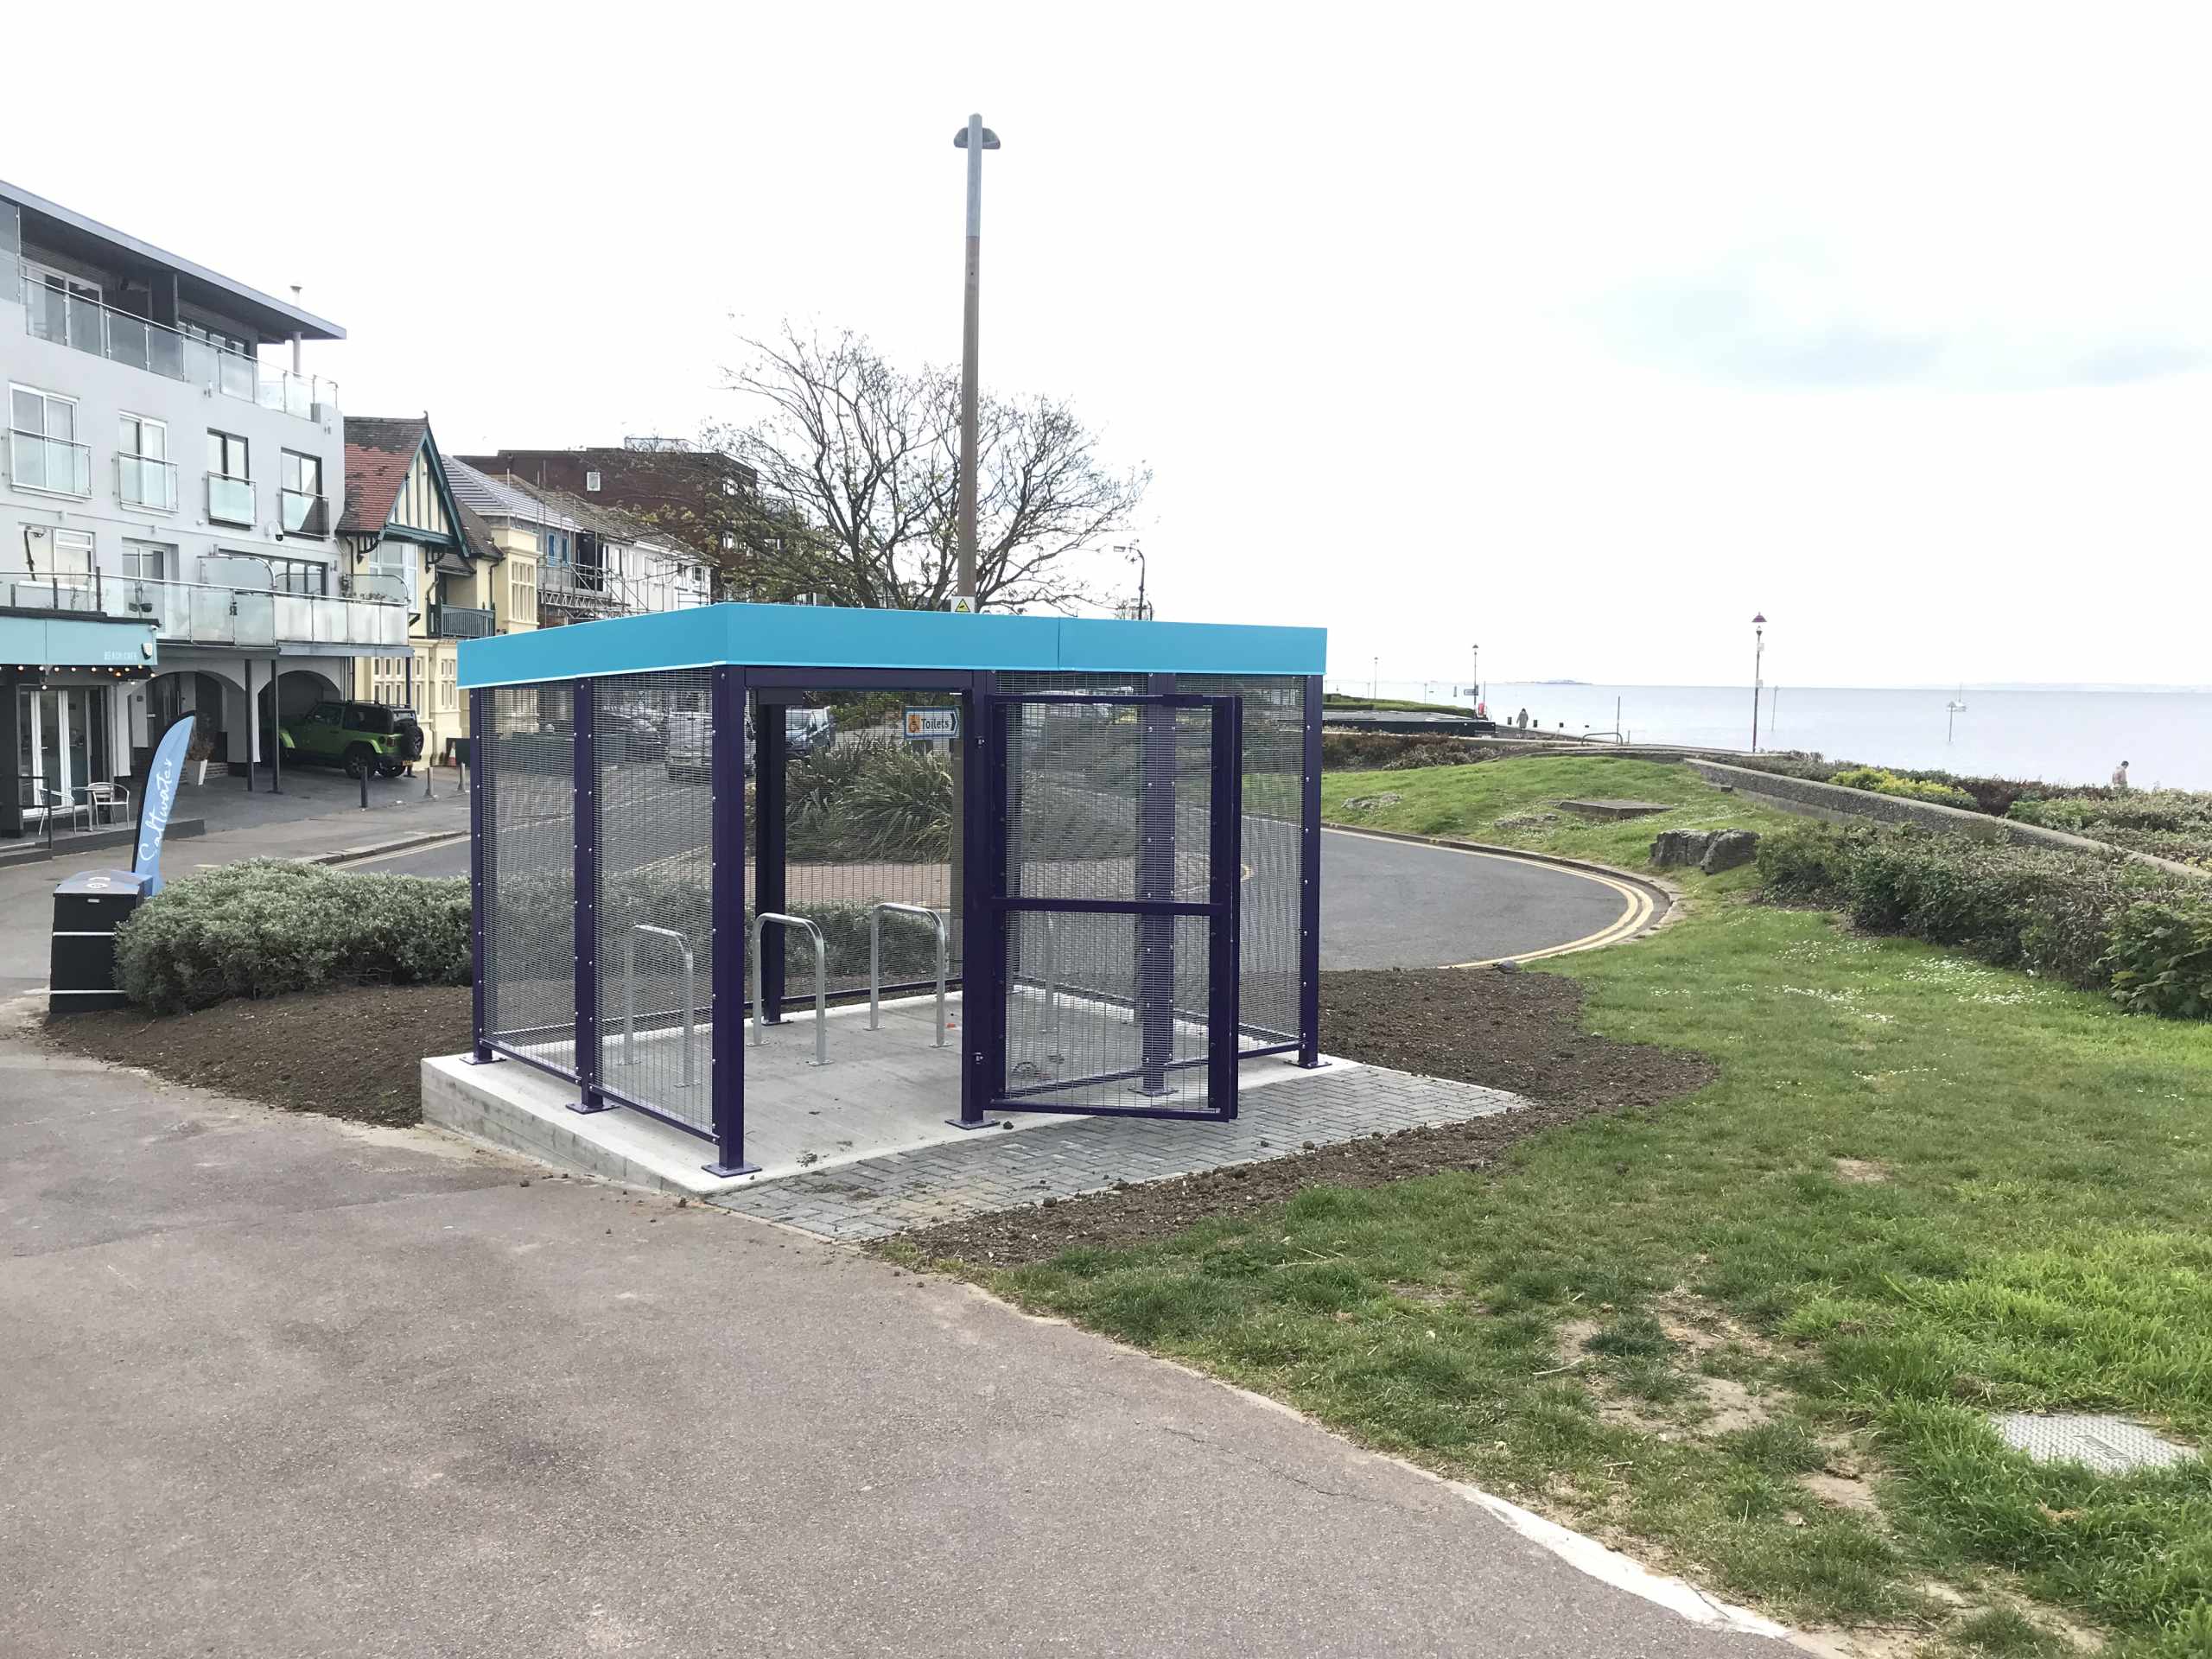 Leigh On Sea News: Bike Shelters Installed - A BICYCLE shelter has been installed near Chalkwell Beach, in a bid to get residents cycling more across the city.